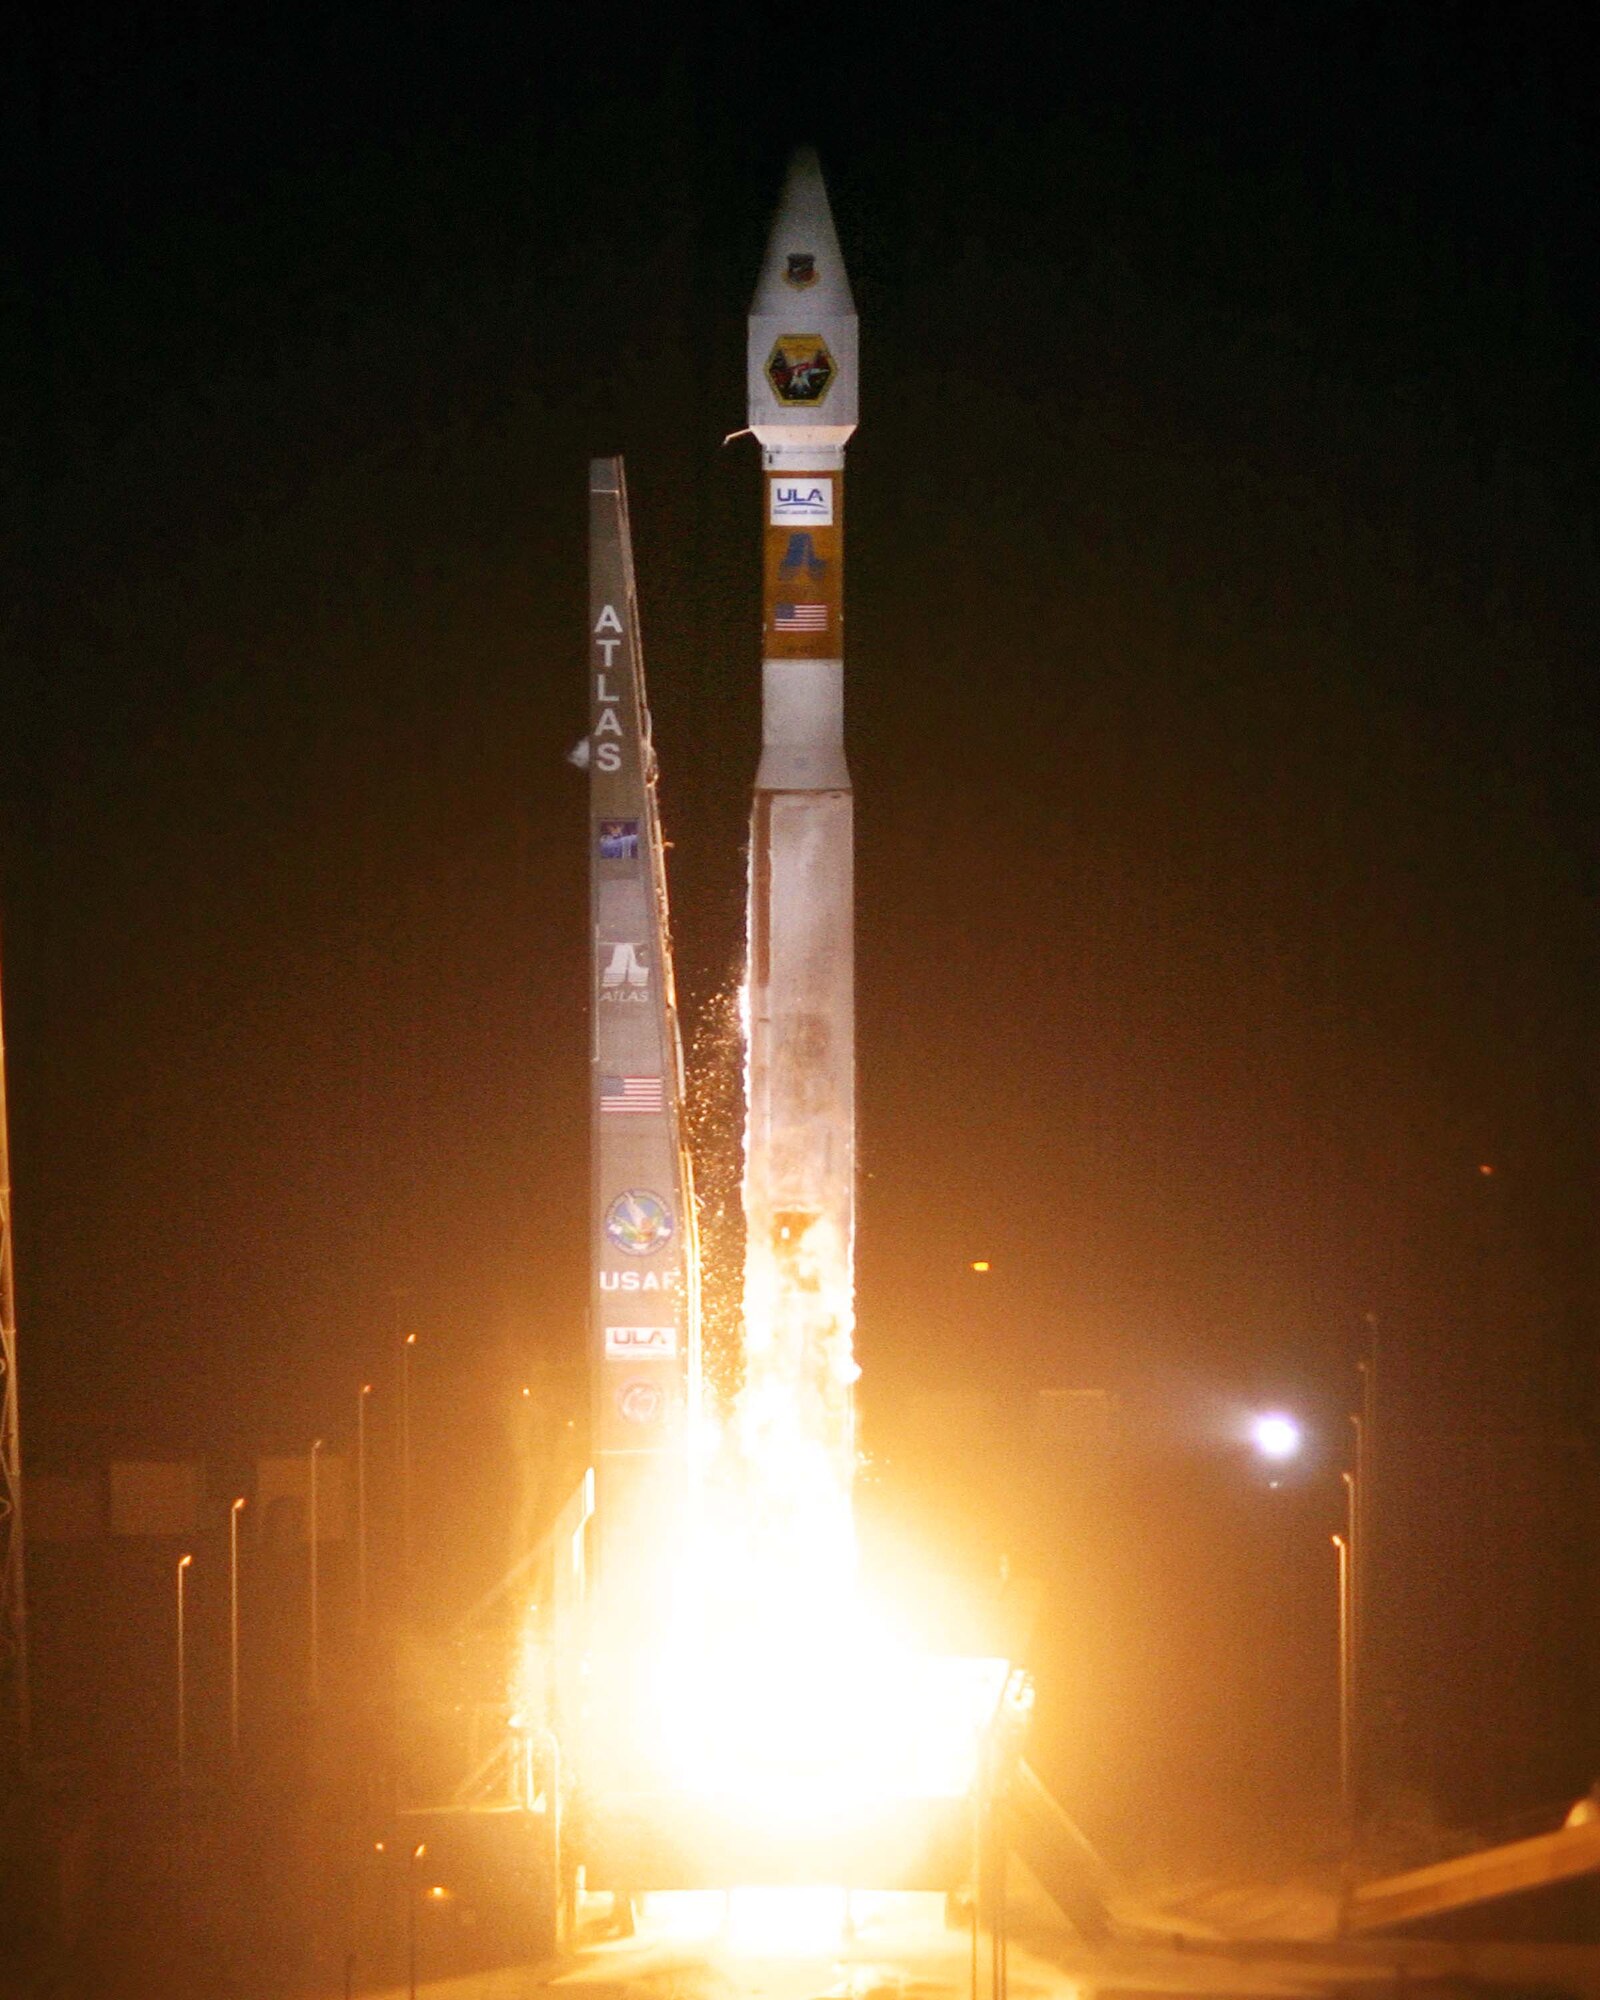 CAPE CANAVERAL AIR FORCE STATION, Fla. – Six satellites were launched into orbit on board a single Atlas V Evolved Expendable Launch Vehicle March 8. The six satellites made up an integrated payload called the Space Test Program-1. (Courtesy photo)